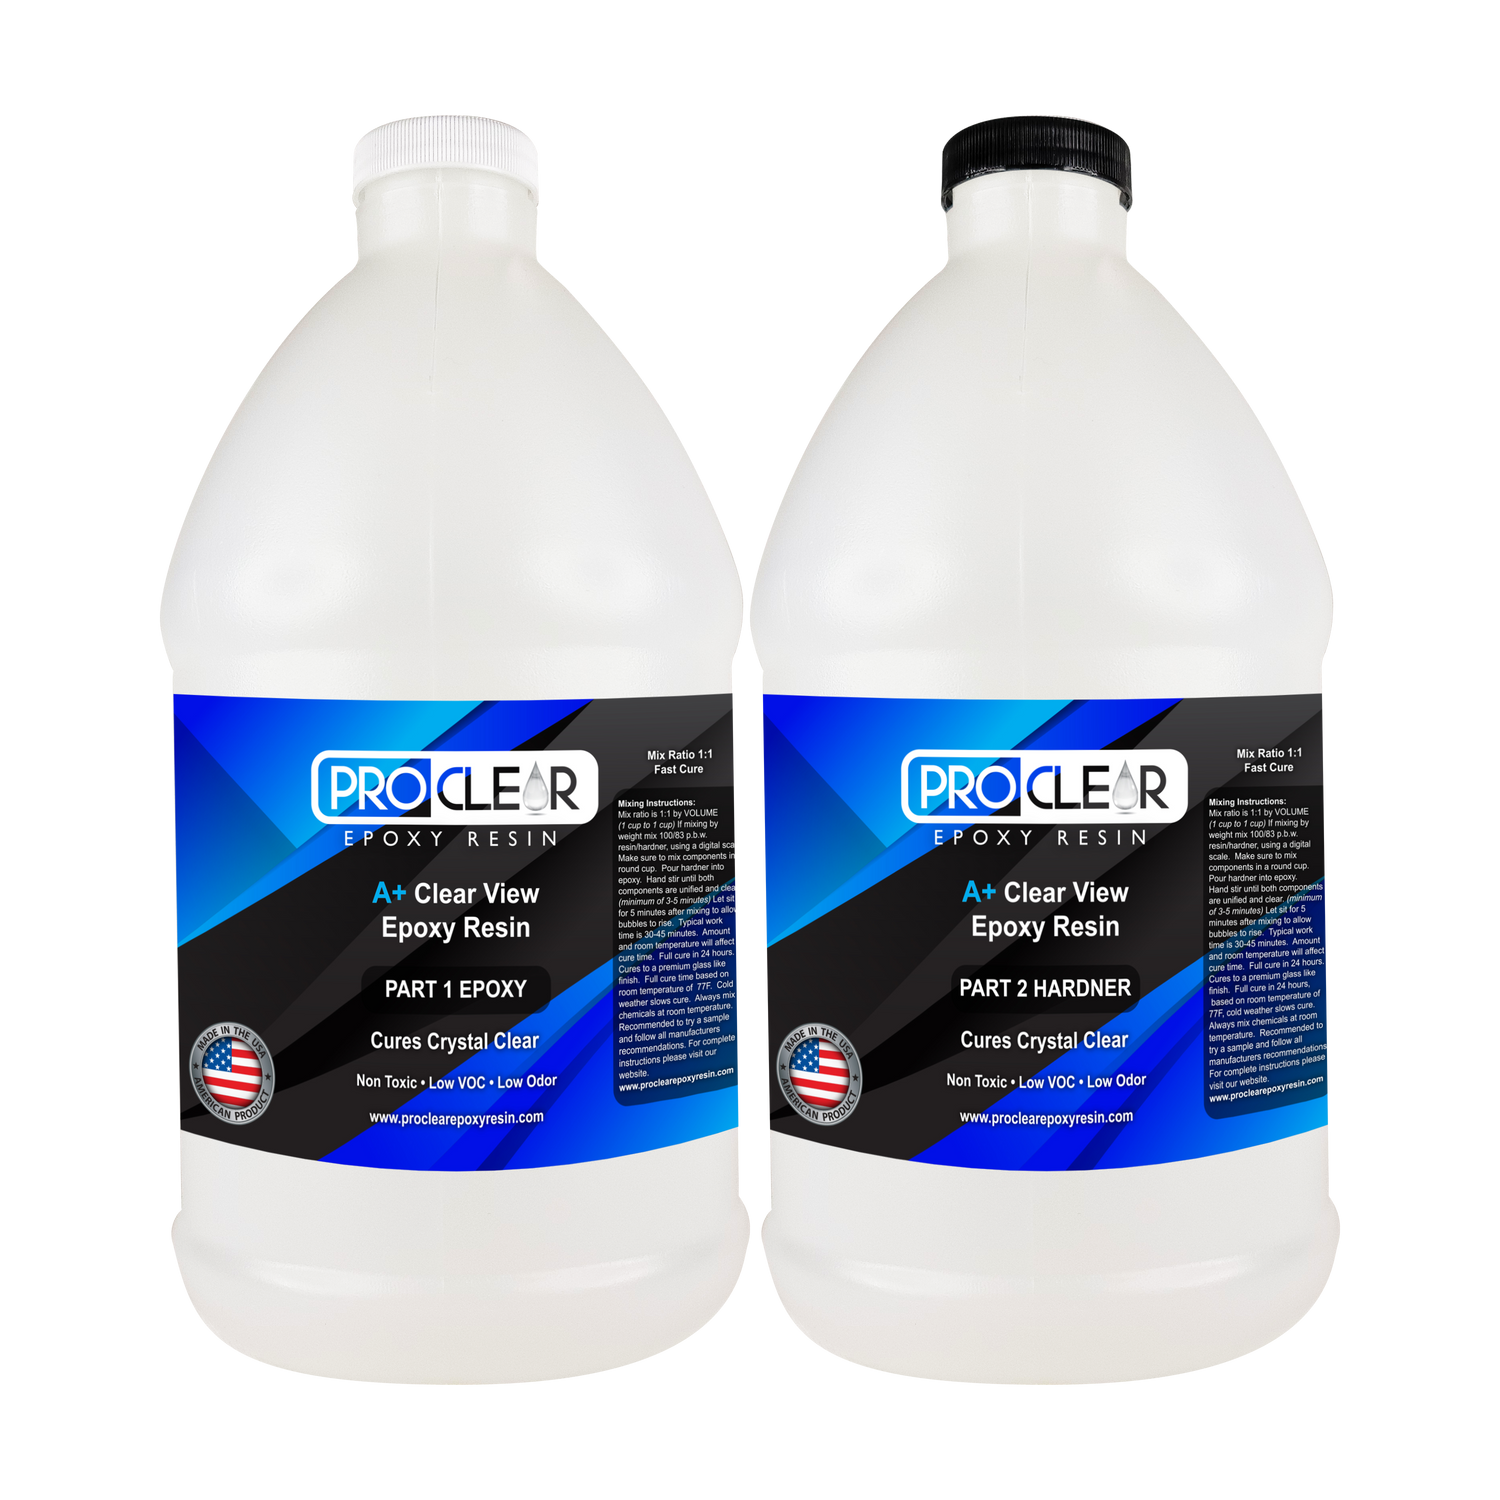 A+ Clear View Epoxy Resin 1 Gallon Kit by Proclear Epoxy Resin (PCALL1GALLON)